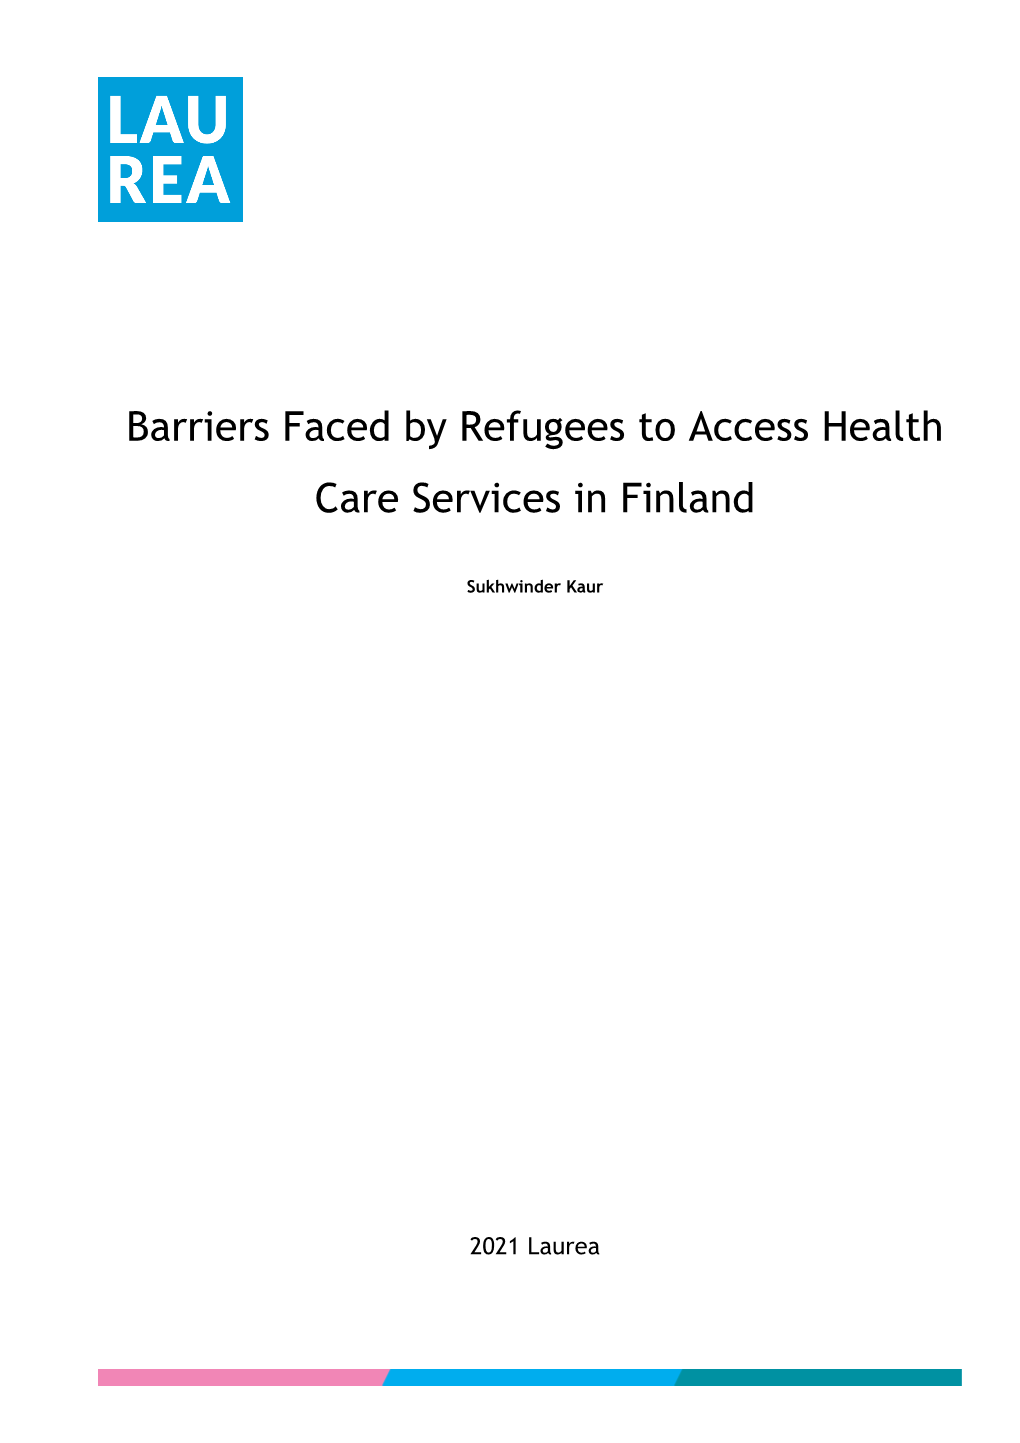 Barriers Faced by Refugees to Access Health Care Services in Finland